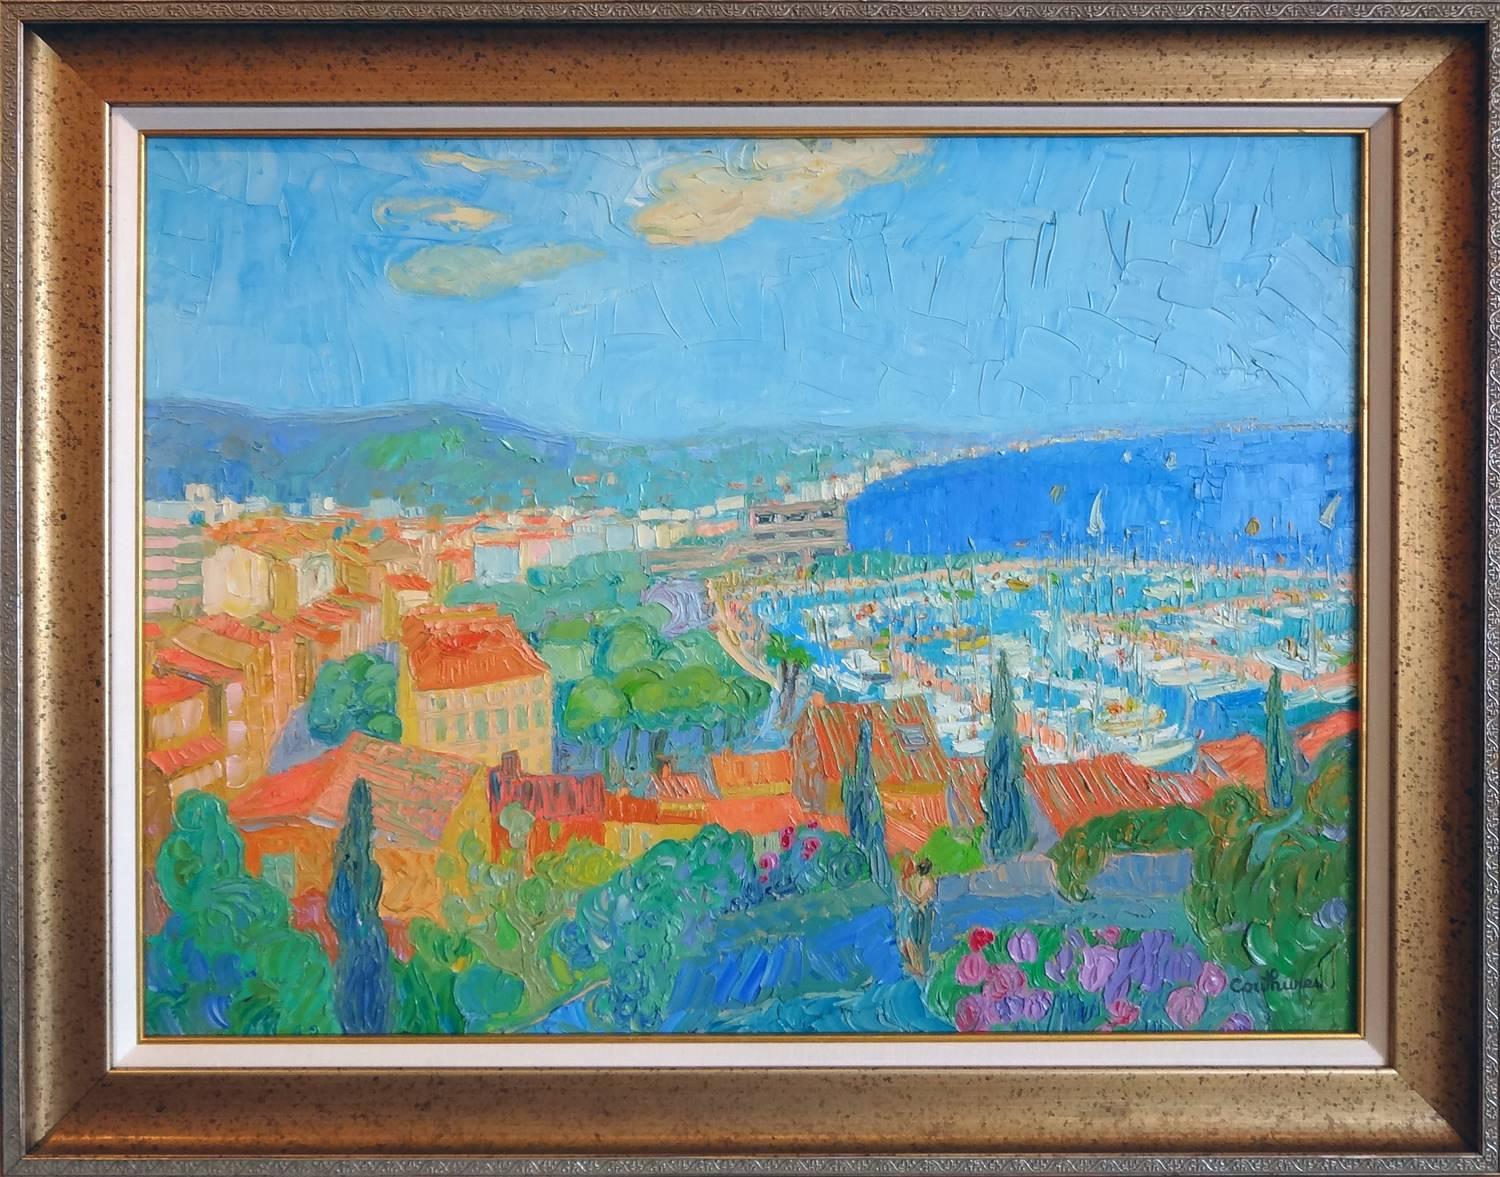 Cannes in the Sun (Cannes au Soleil) - Painting by Daniel Couthures